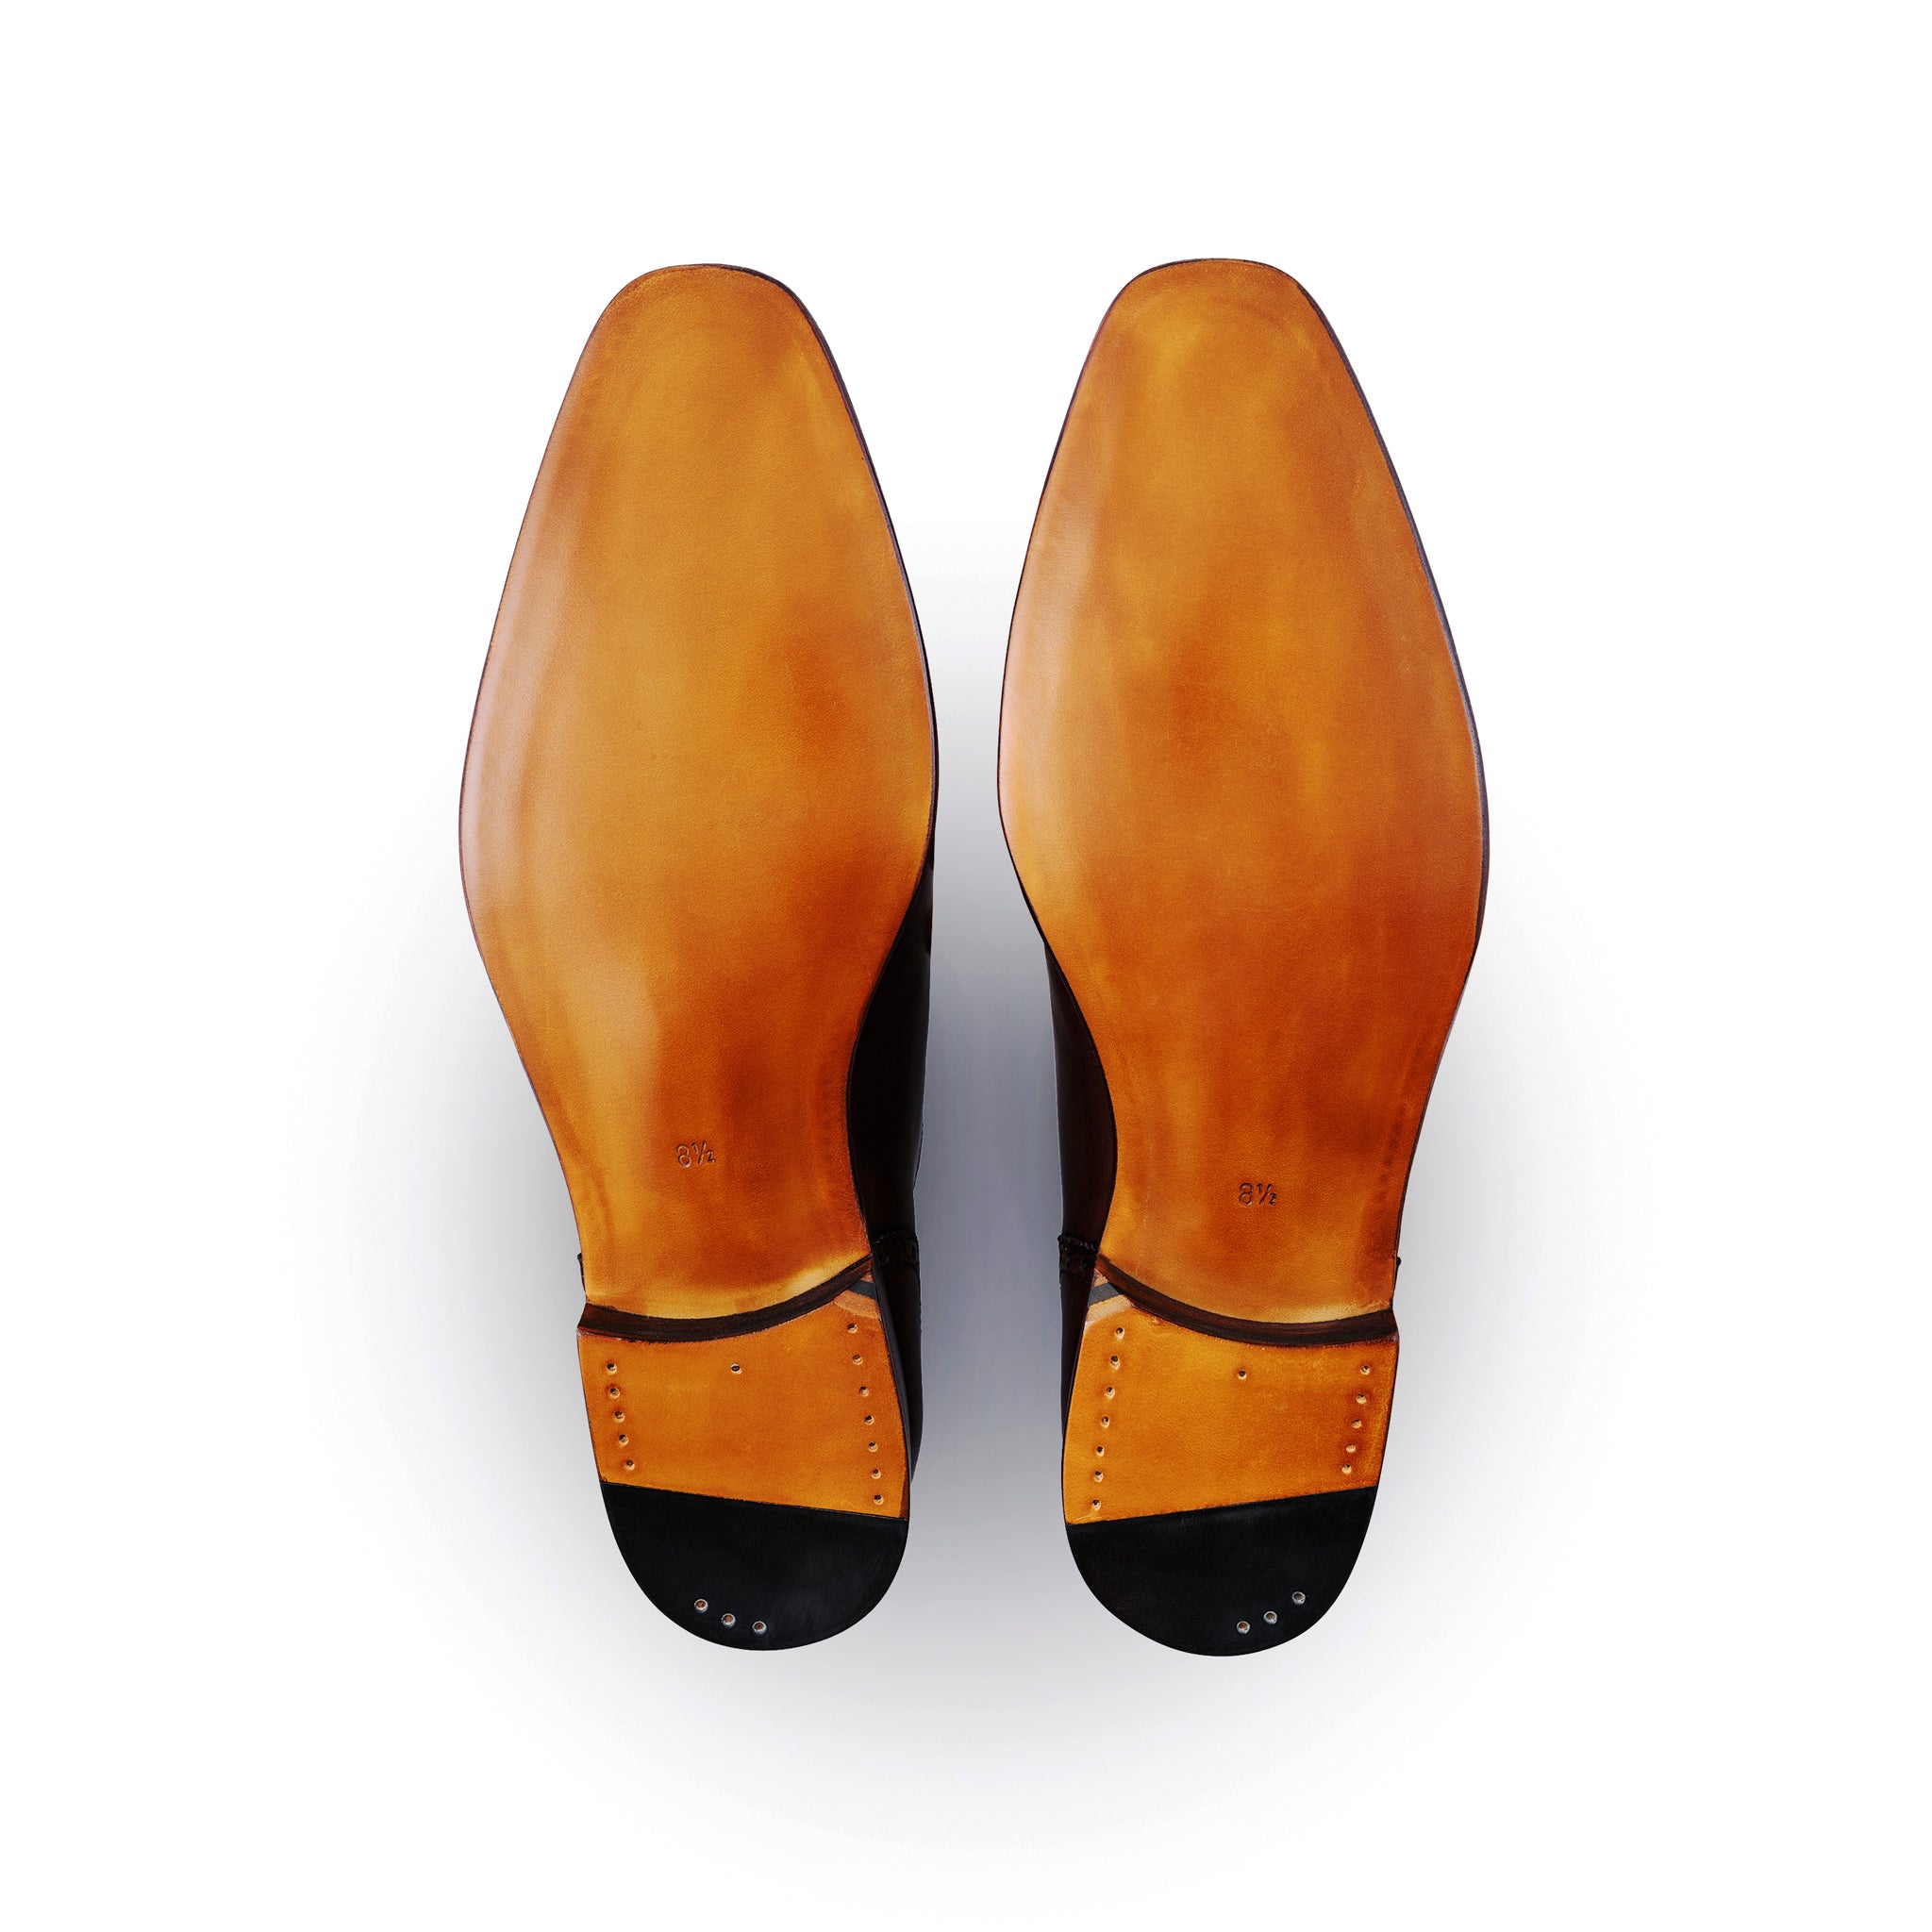 leather sole dress shoes